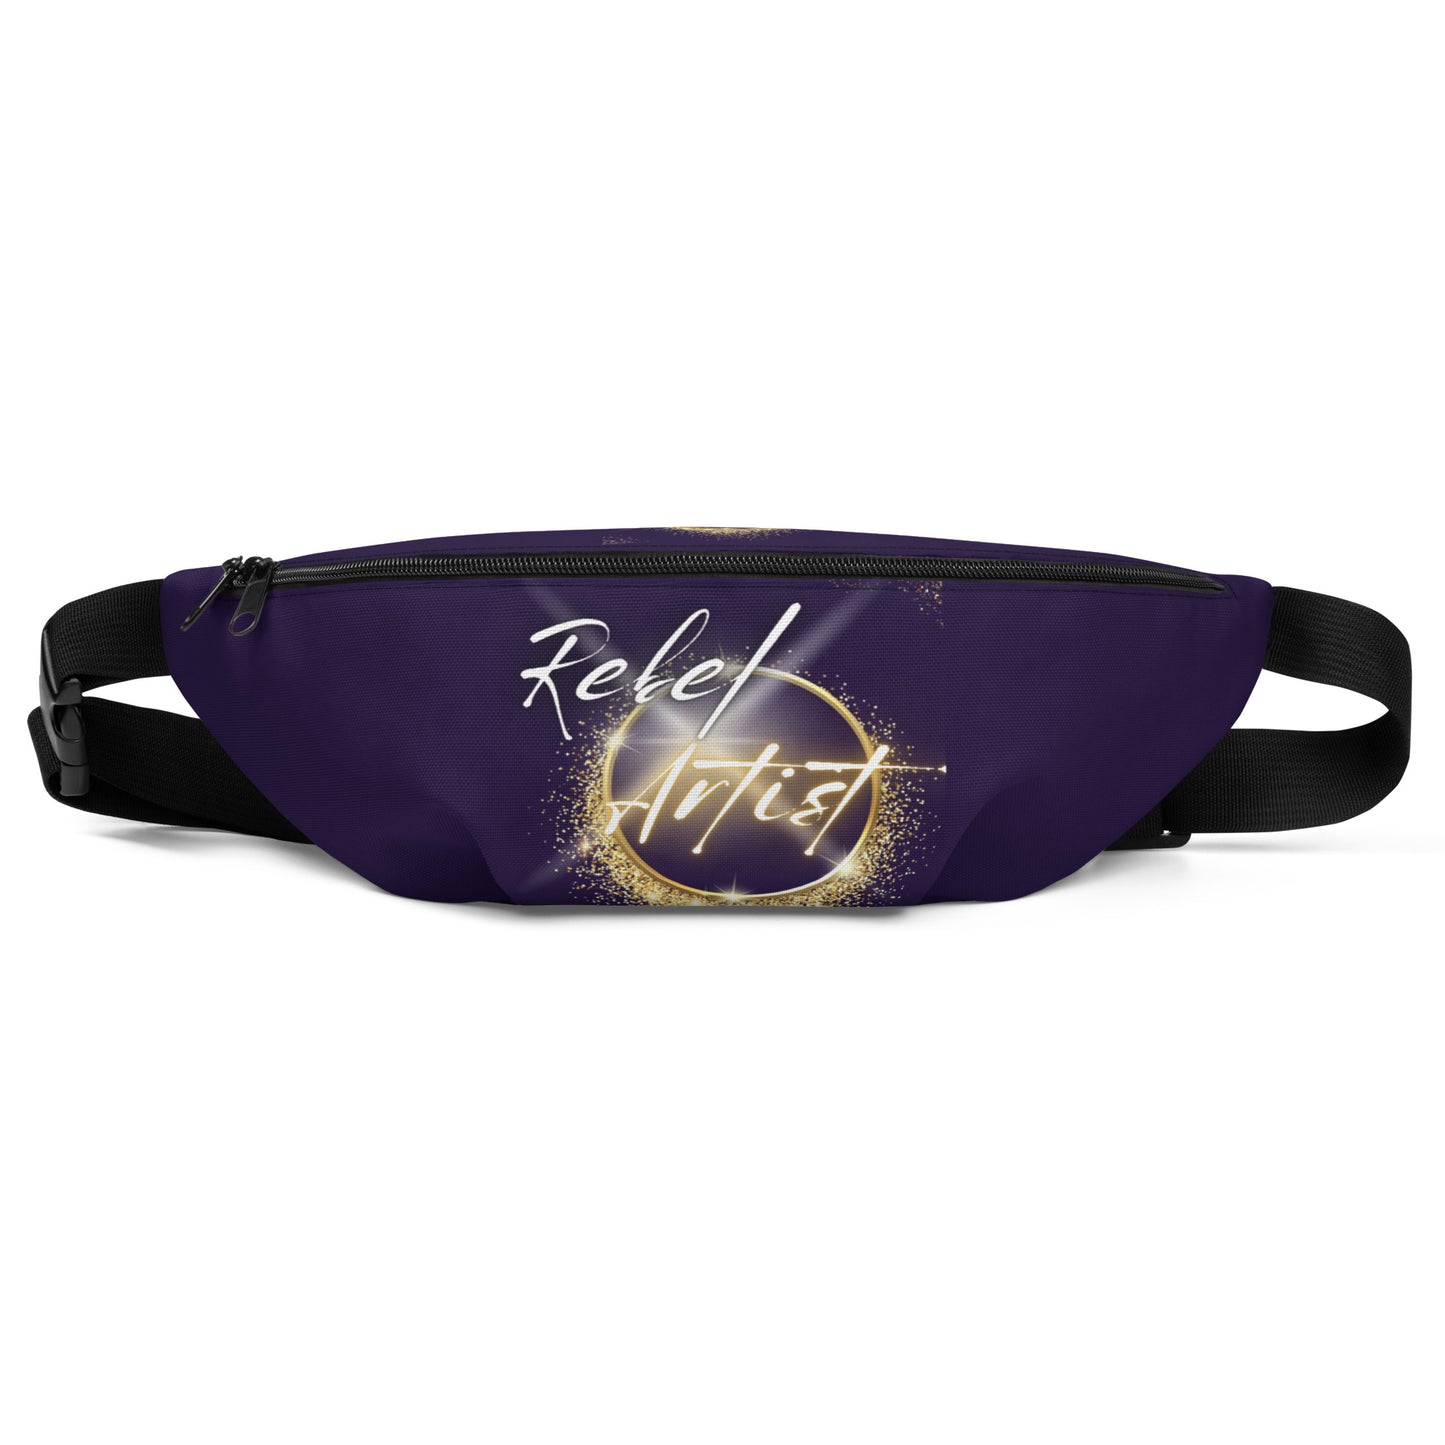 Rebel Artist Fanny Pack for the artist who makes a statement